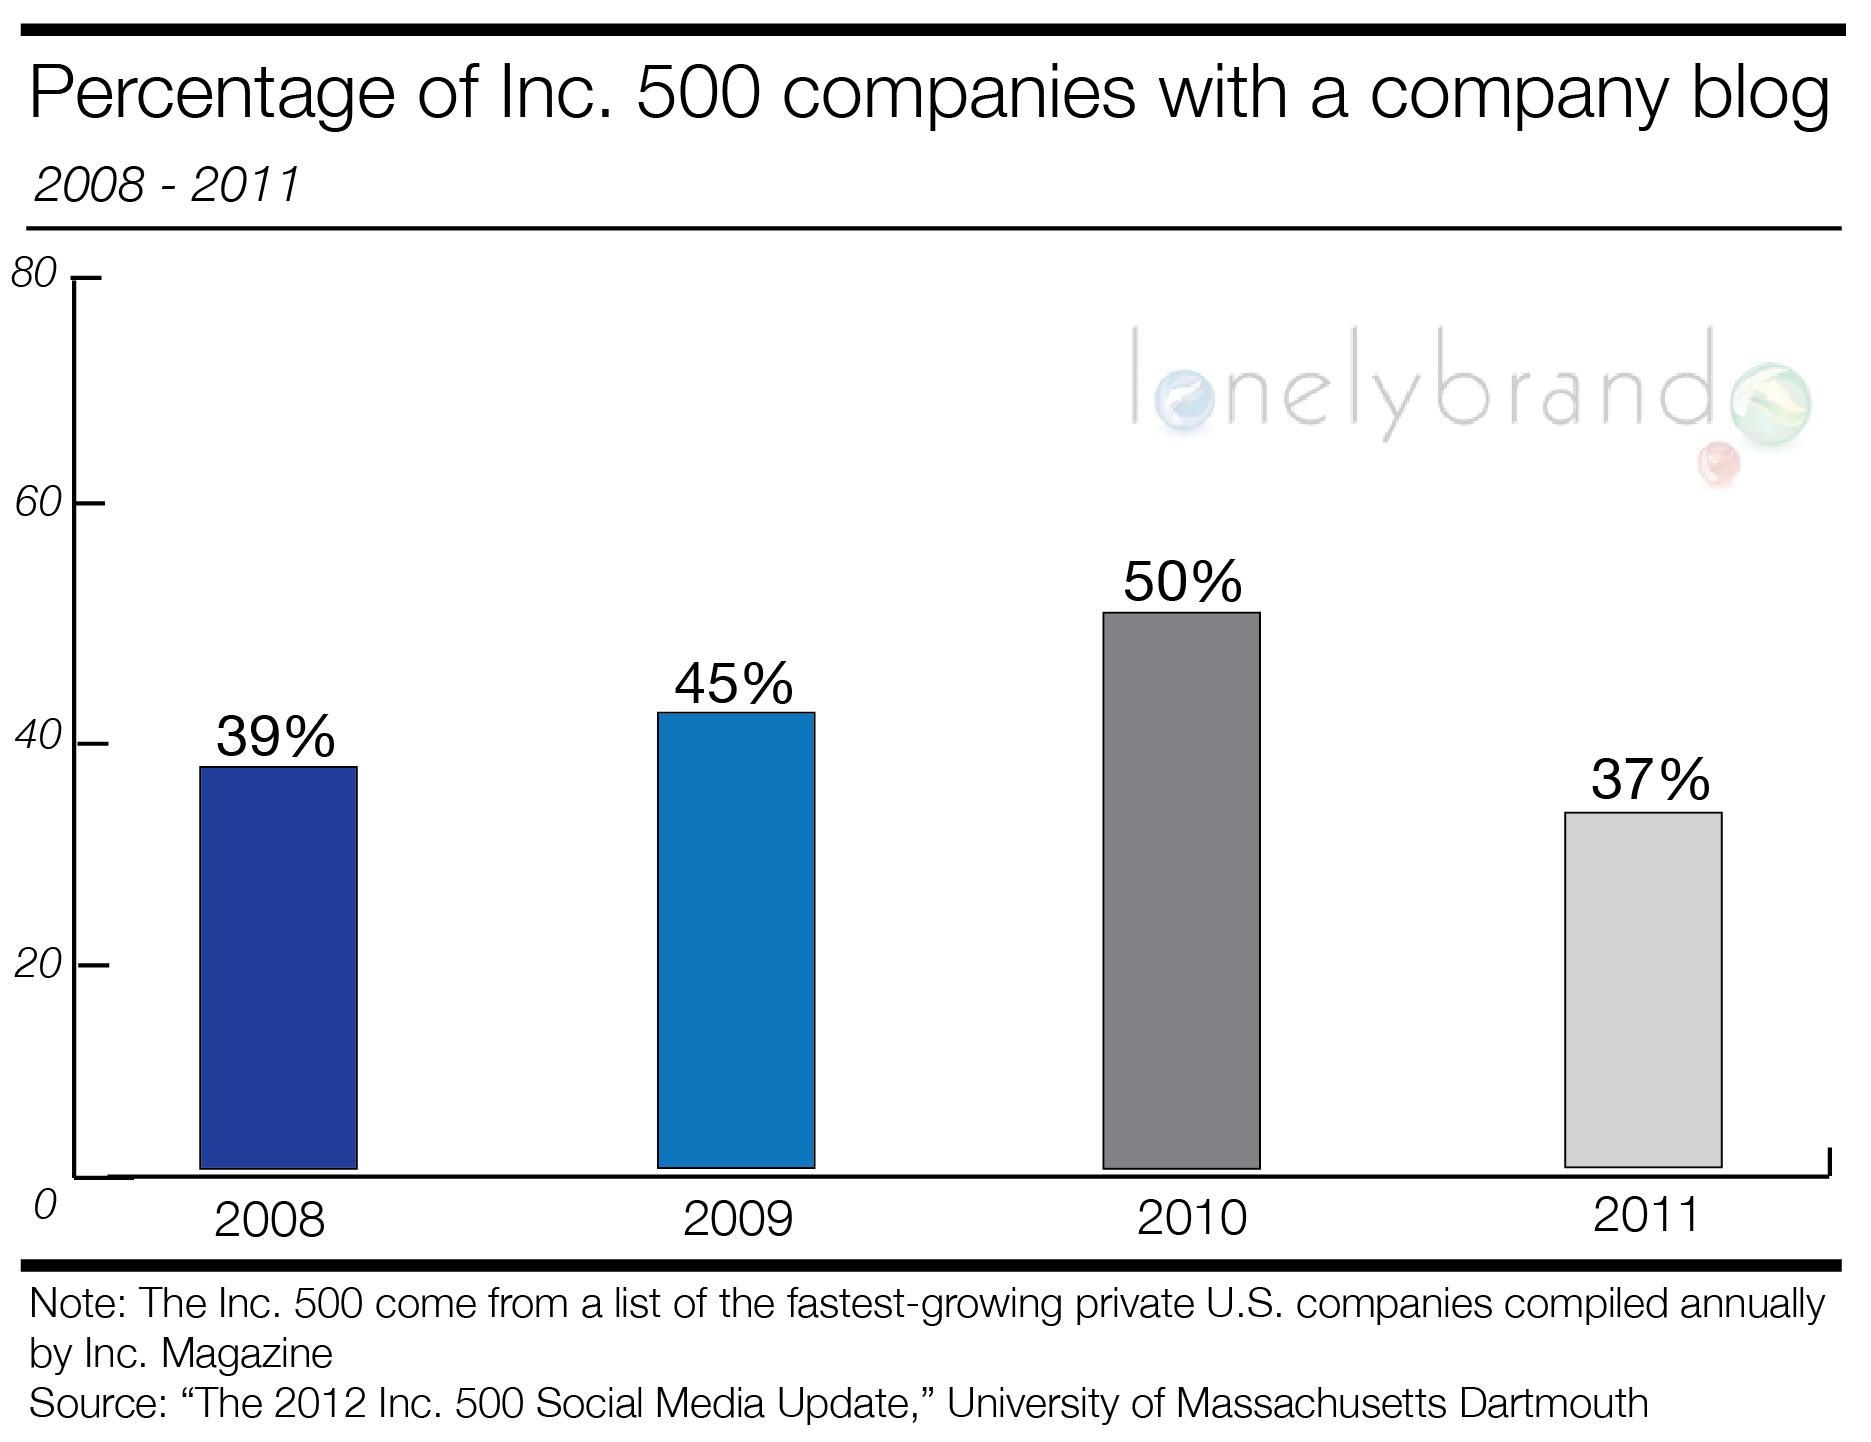 percentage of Inc. 500 companies with company blog, company blogs, Inc. 500 companies